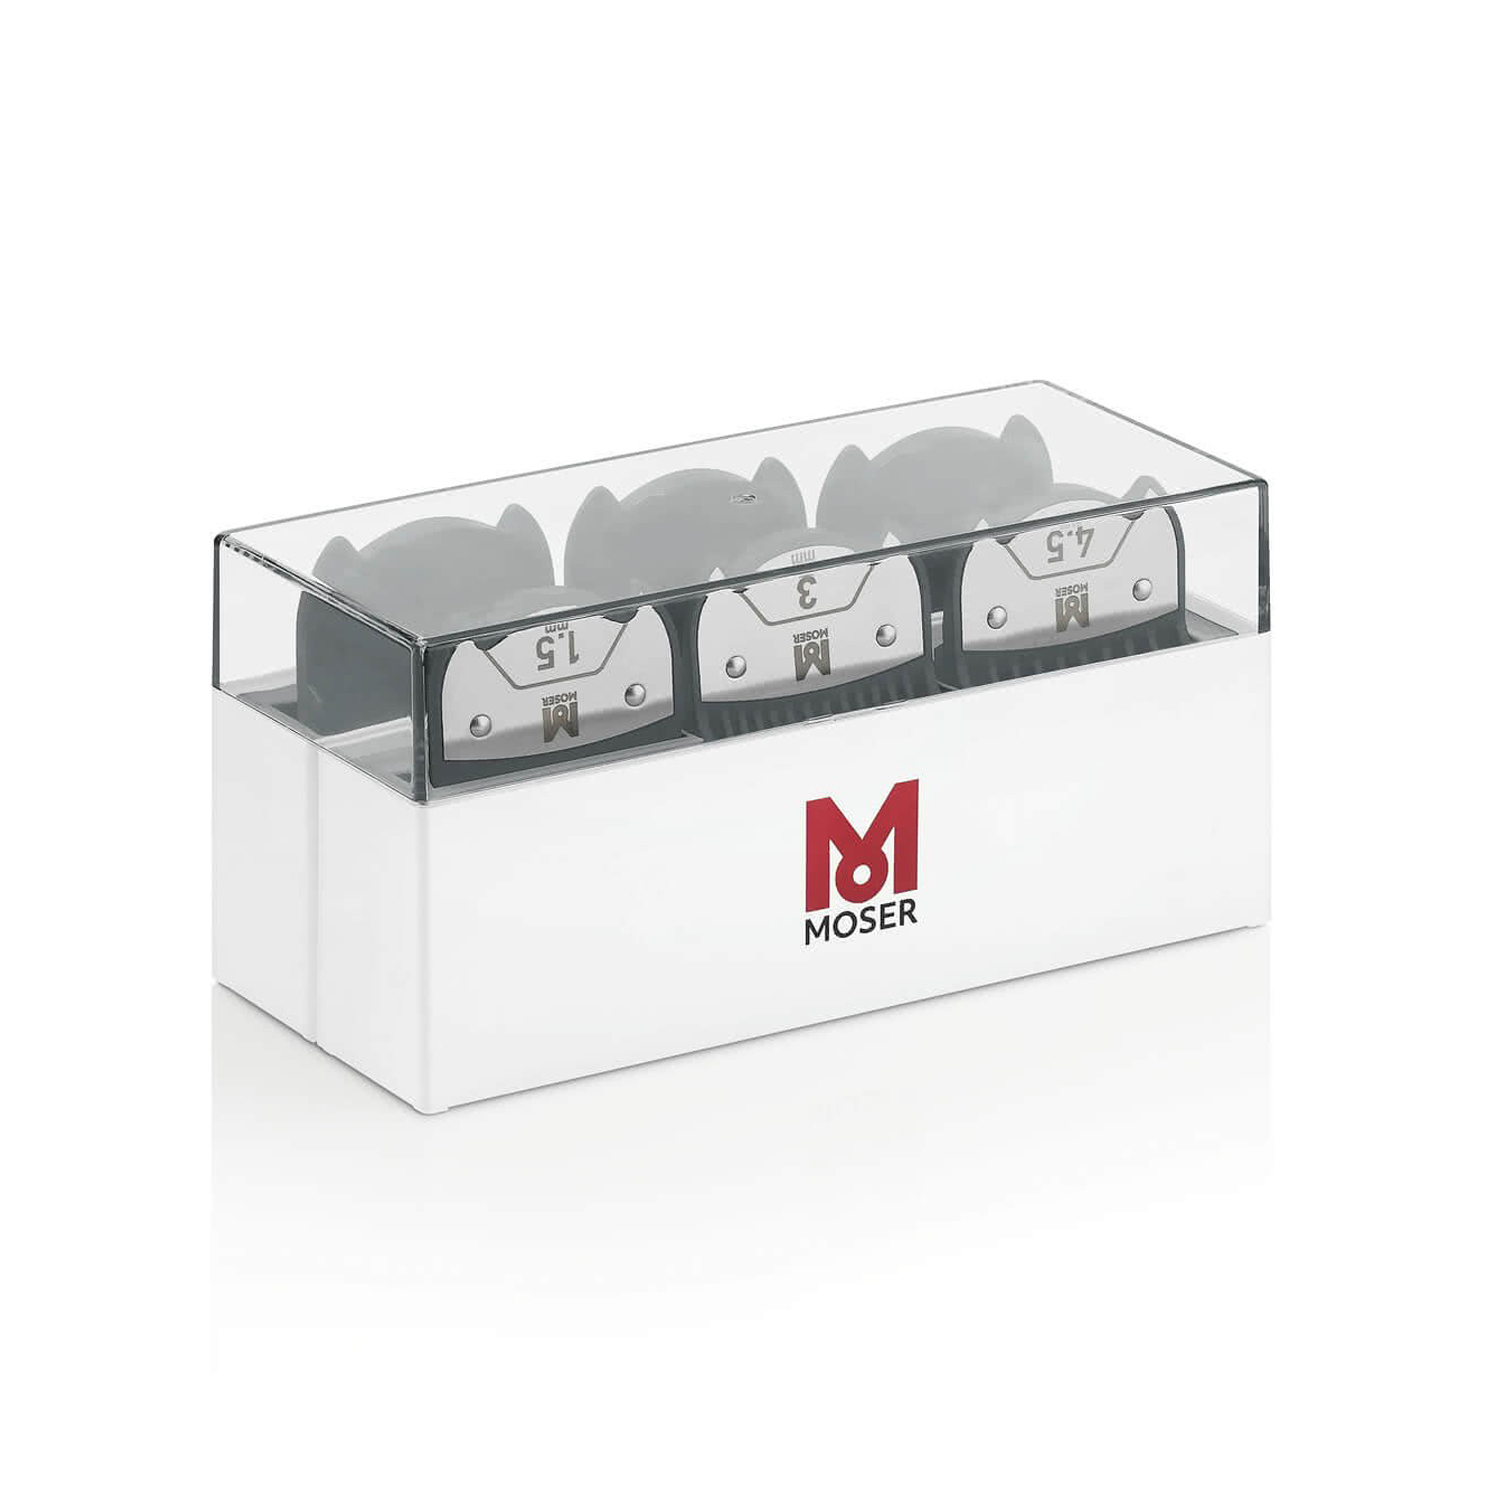 MOSER magnetic attachment combs set